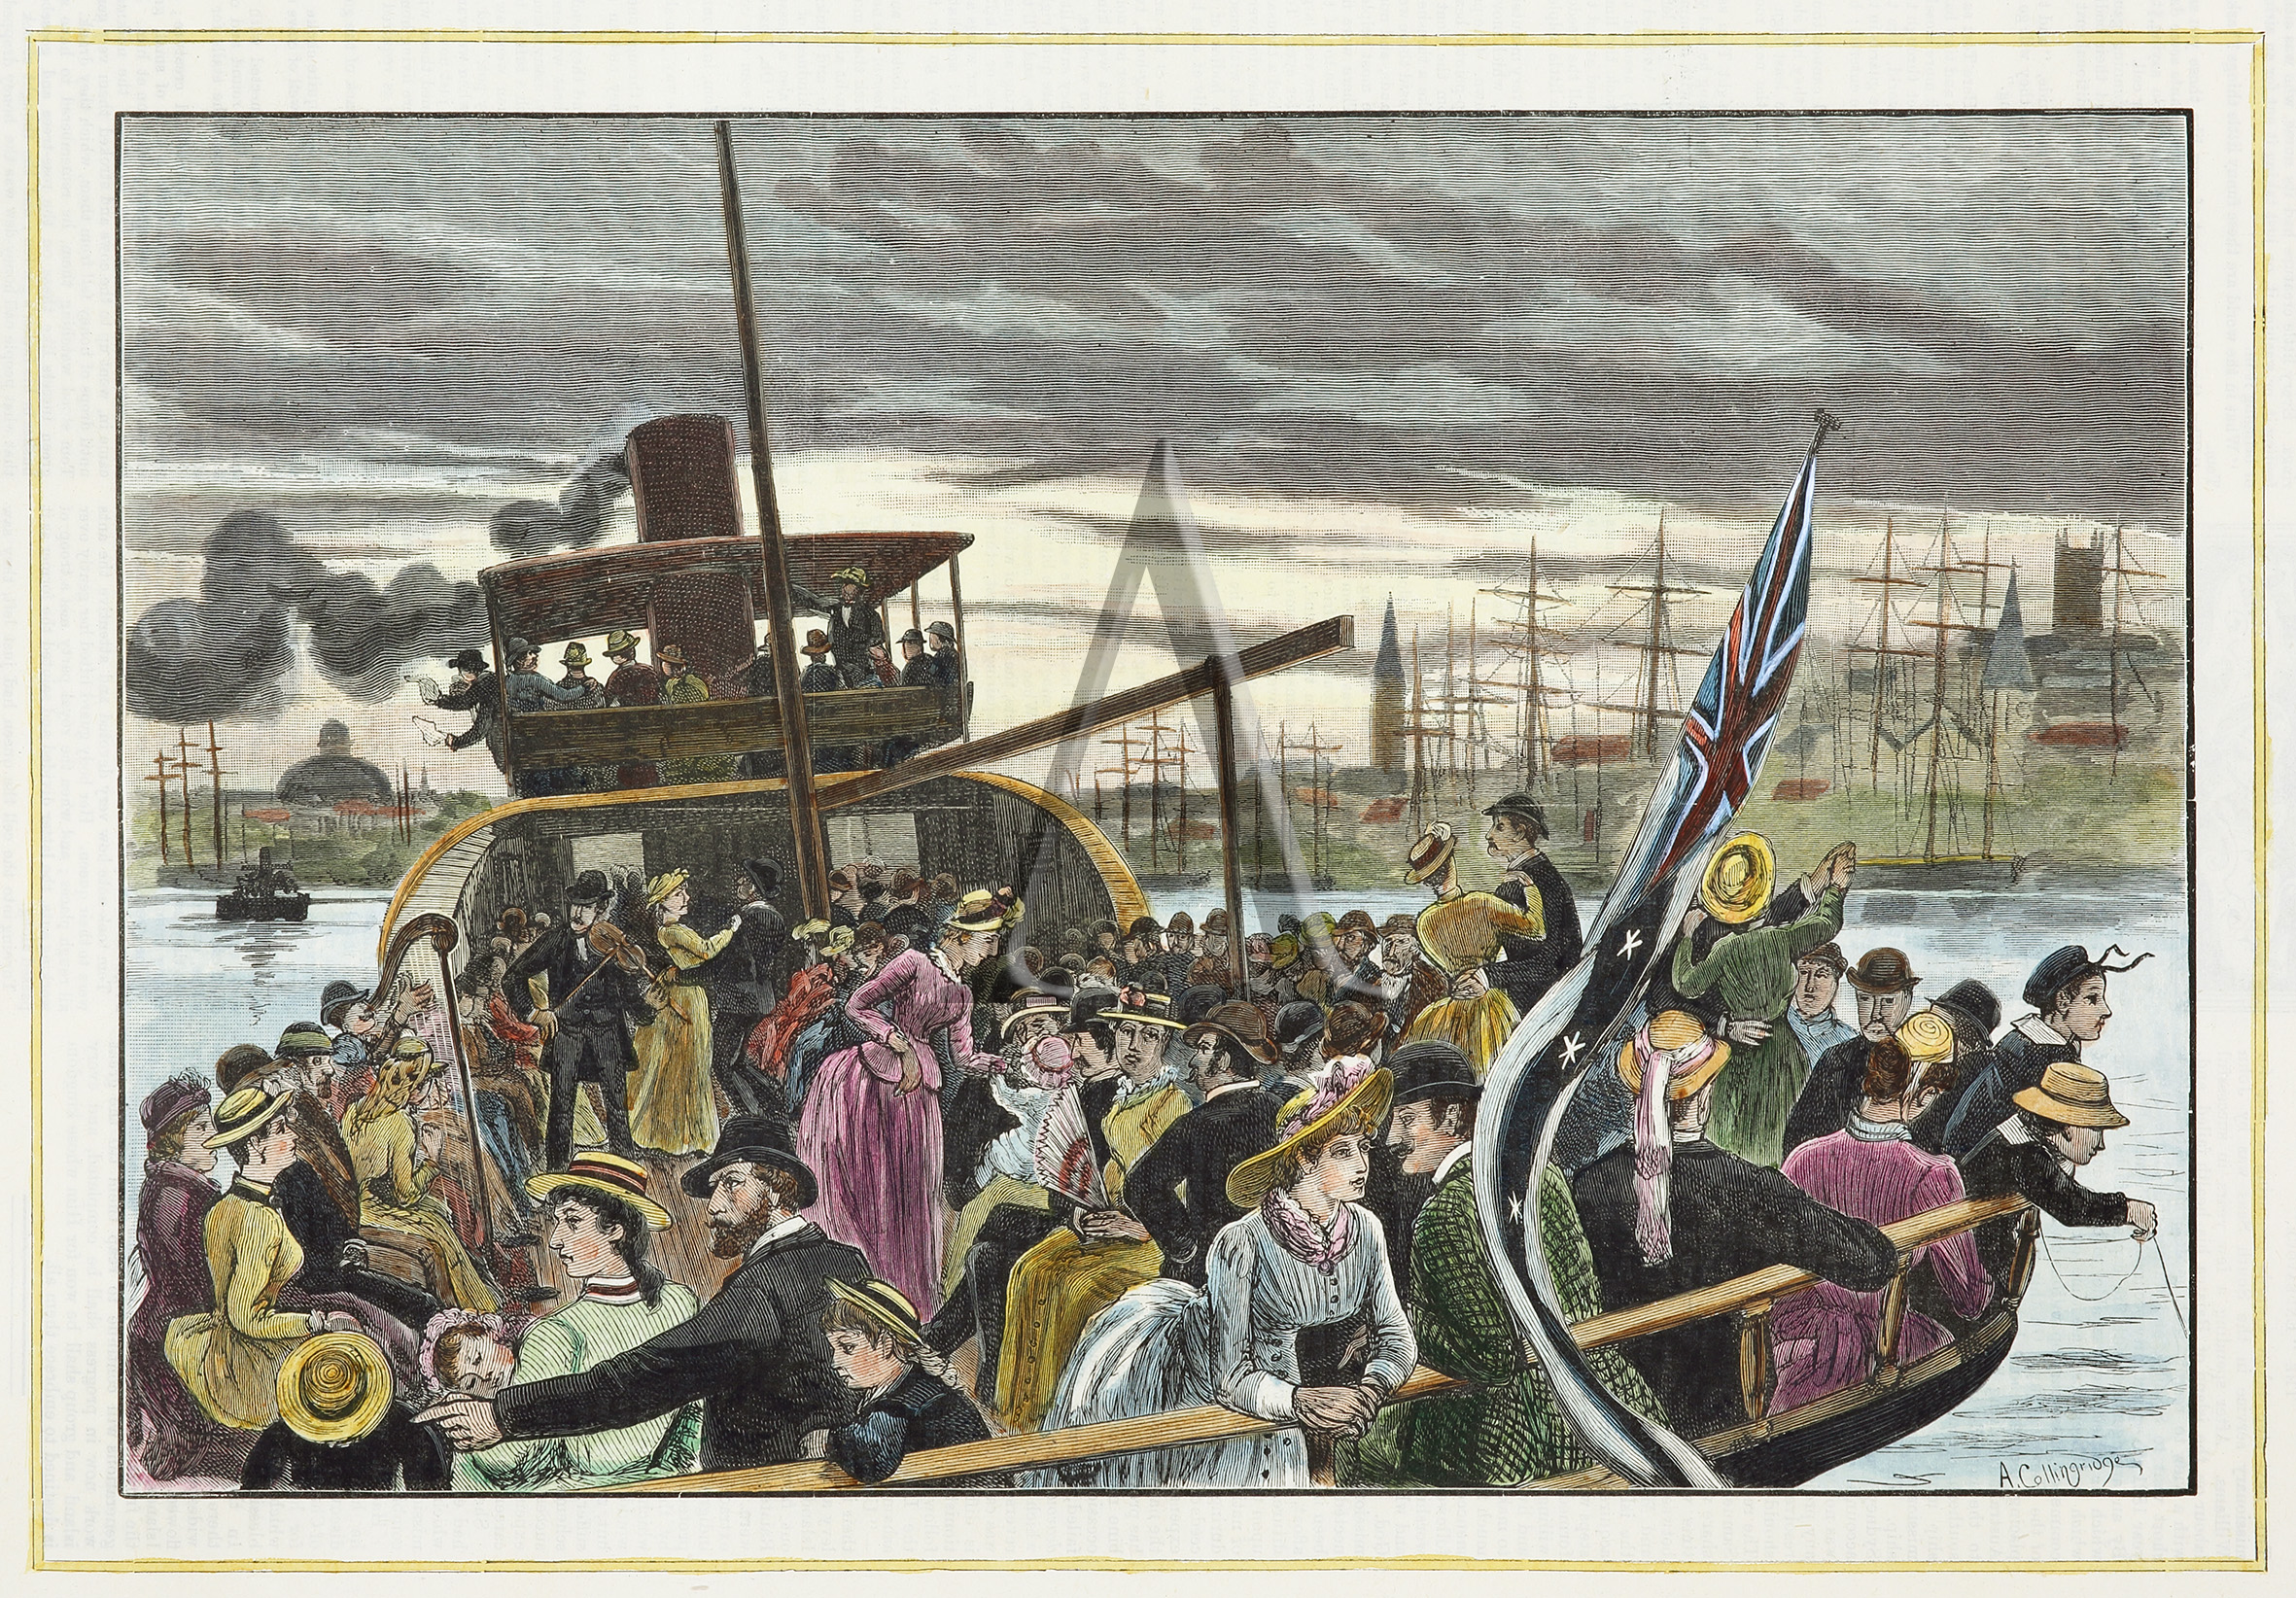 Return of the Picnic Steamers - New Year's Day. - Antique Print from 1885